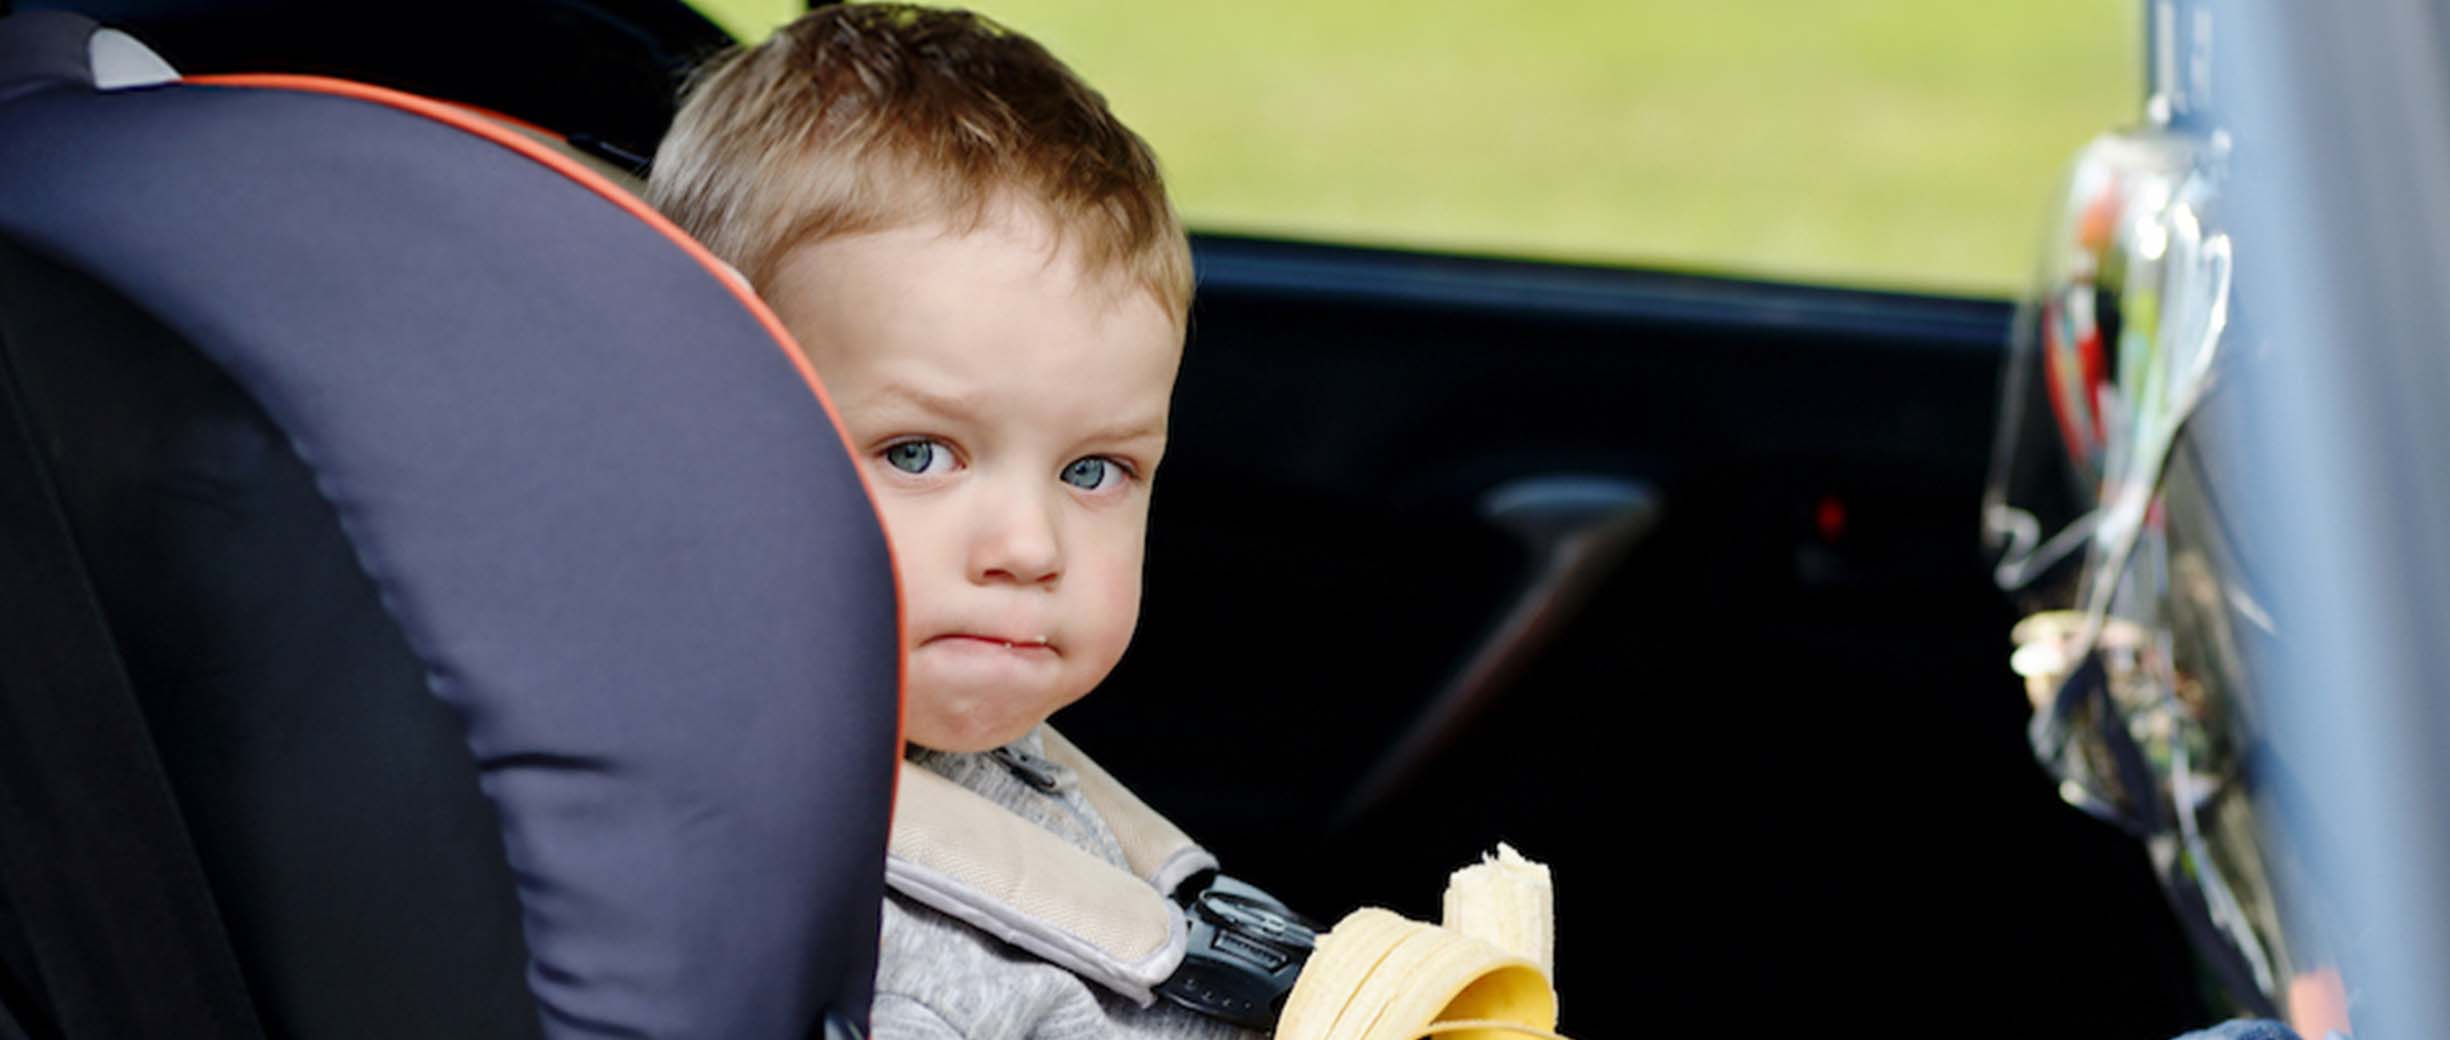 7 Breakfast Meals Kids Can Eat in the Car